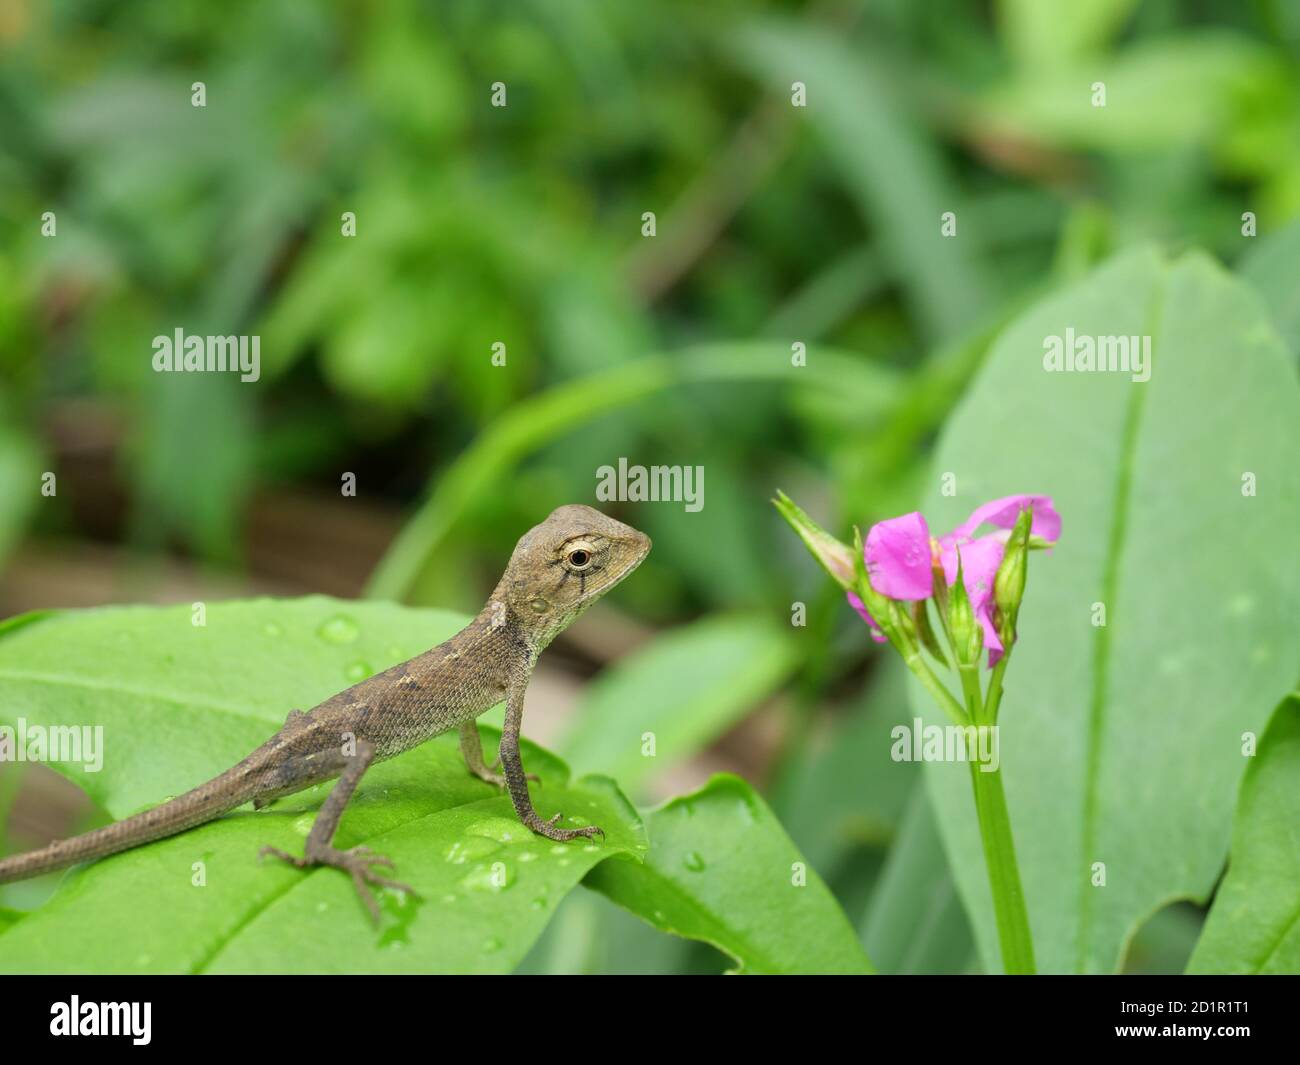 Baby Oriental garden or Eastern garden or Changeable lizard looking pink flower blossom on tree with natural green leaves in the background. Thailand Stock Photo